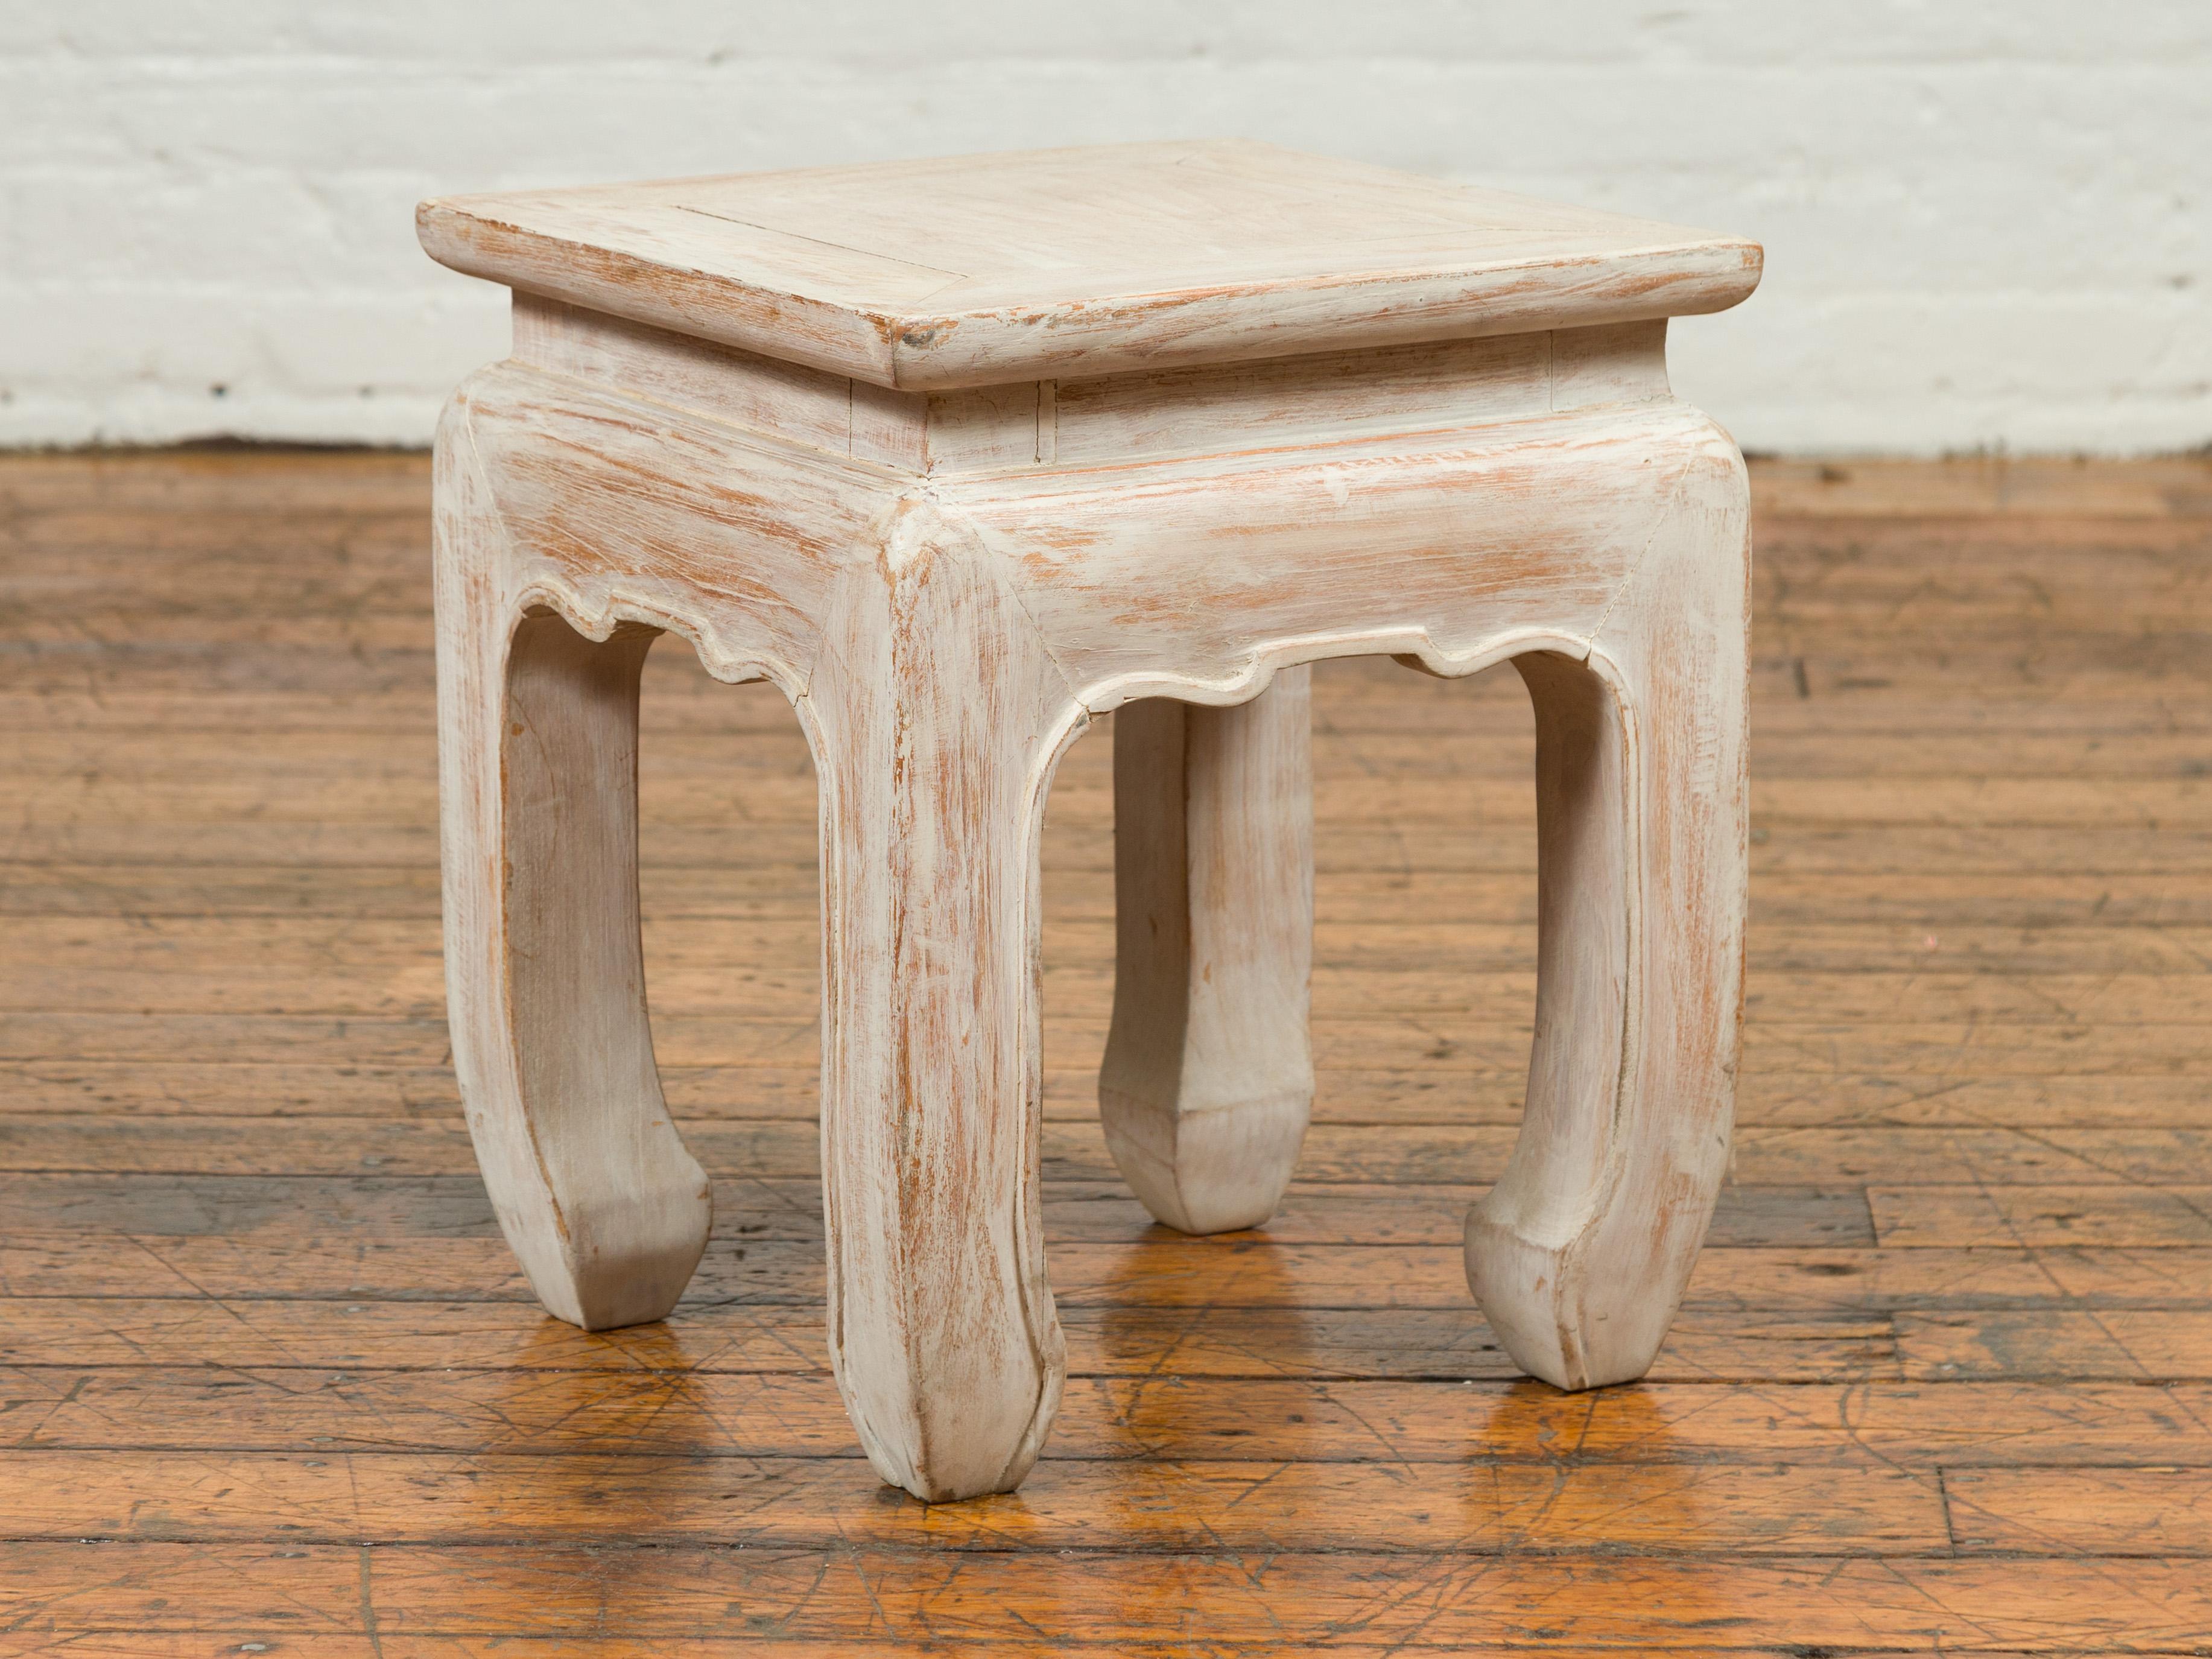 A contemporary Ming style Thai painted teak waisted stool with chow legs and carved apron. Charming us with its elegant lines and distressed finish, this Ming style stool features a square waisted top sitting above four chow legs, connected to one